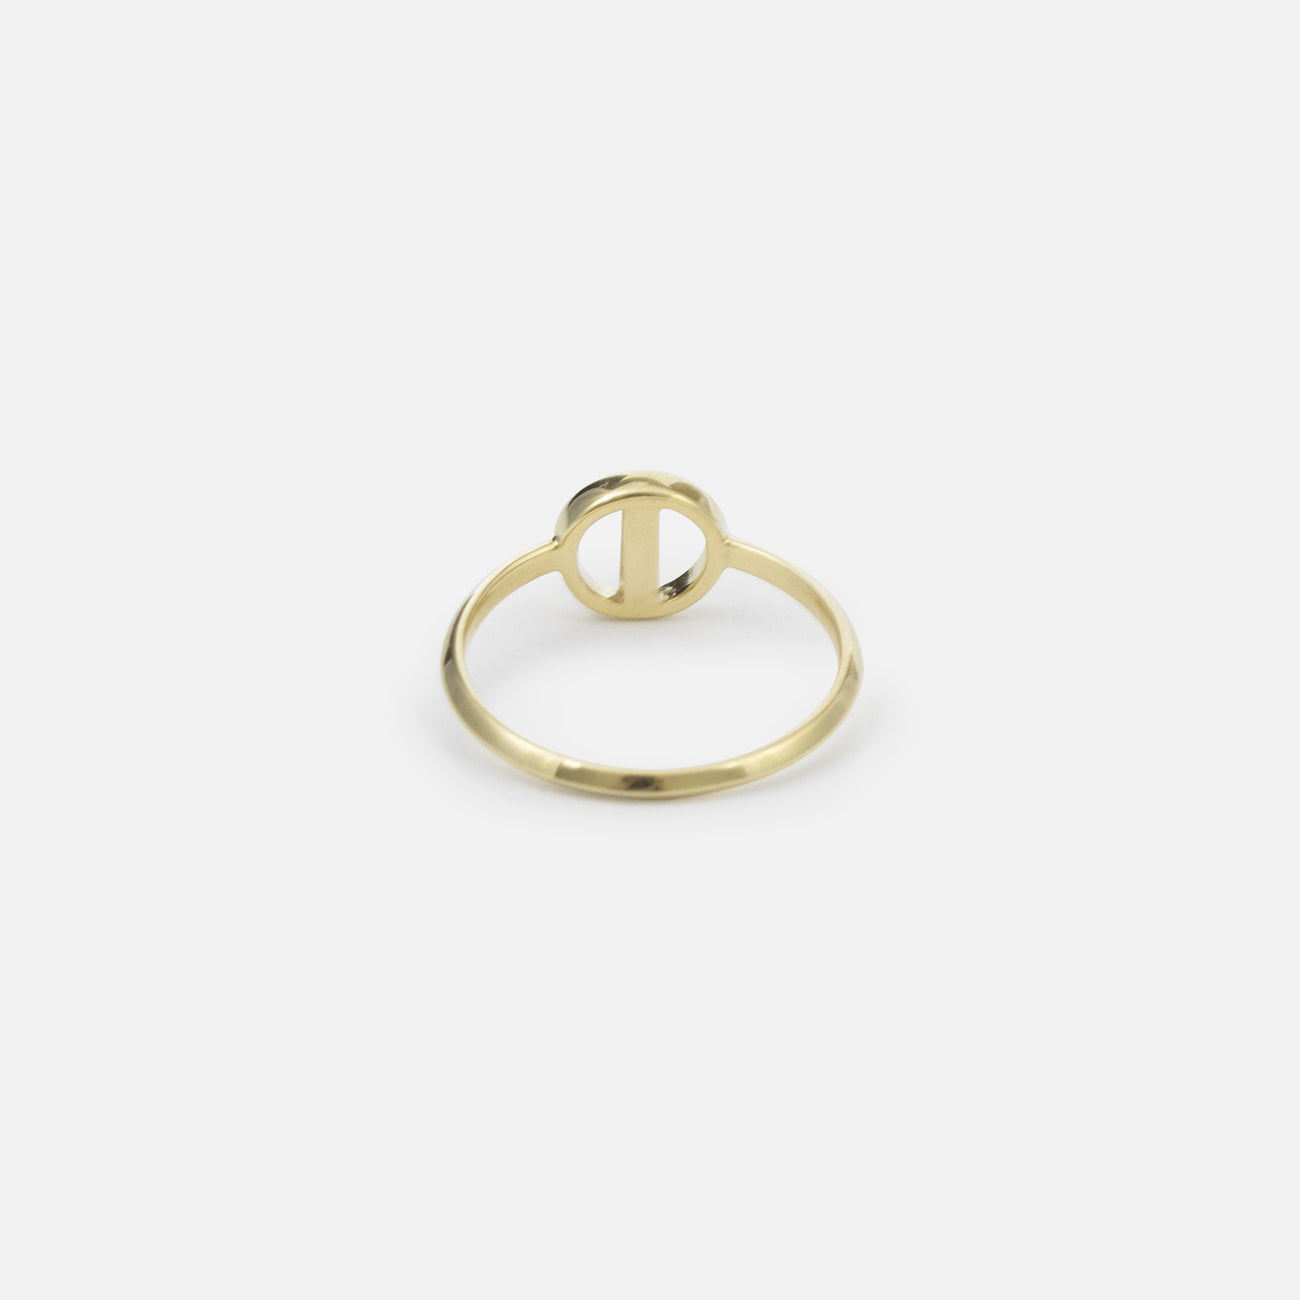 Lita Thin Ring in 14k Gold set with White Diamond by SHW Fine Jewelry